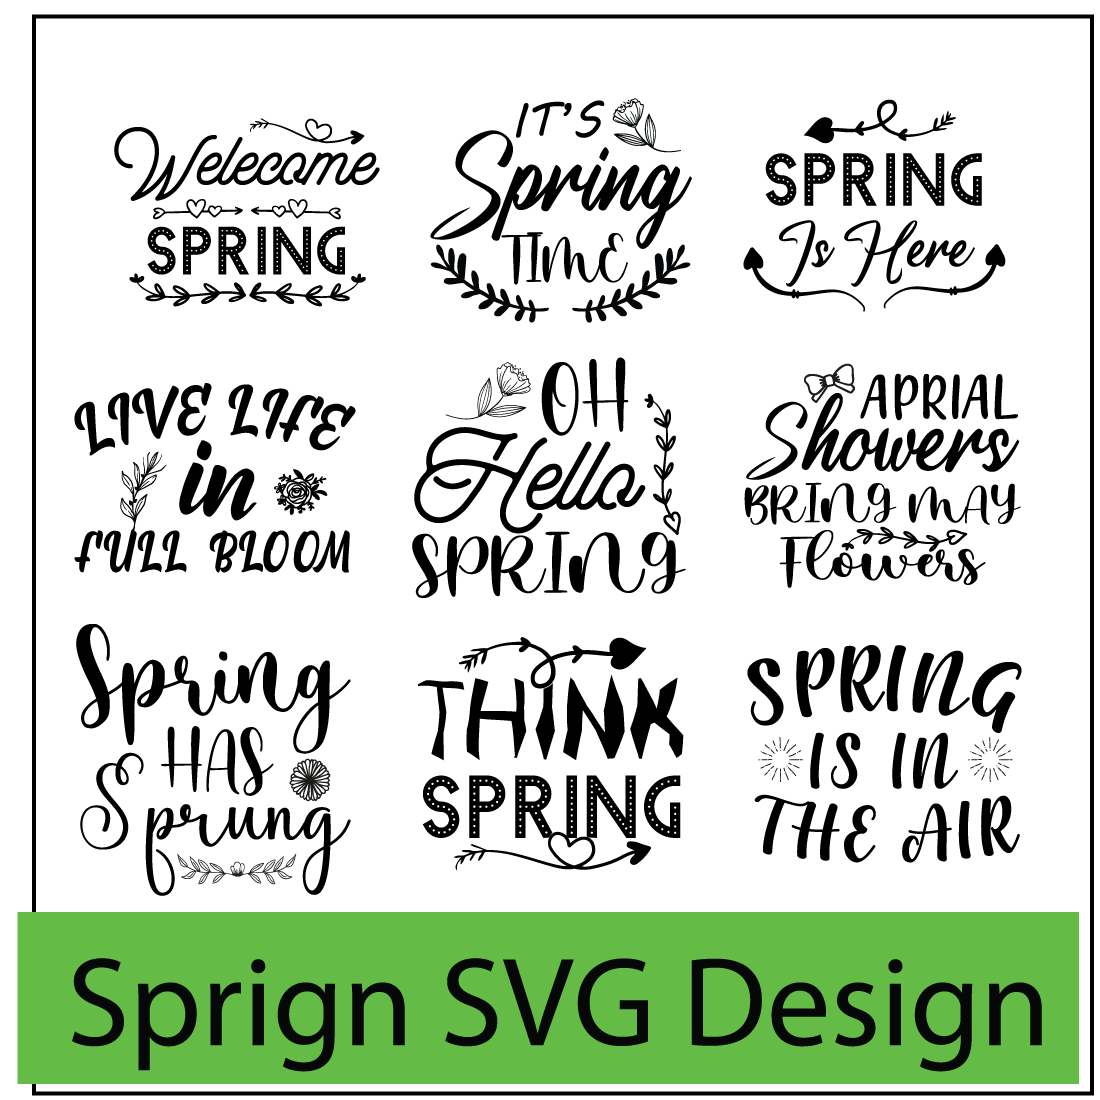 Spring Quotes SVG Designs Bundle cover image.